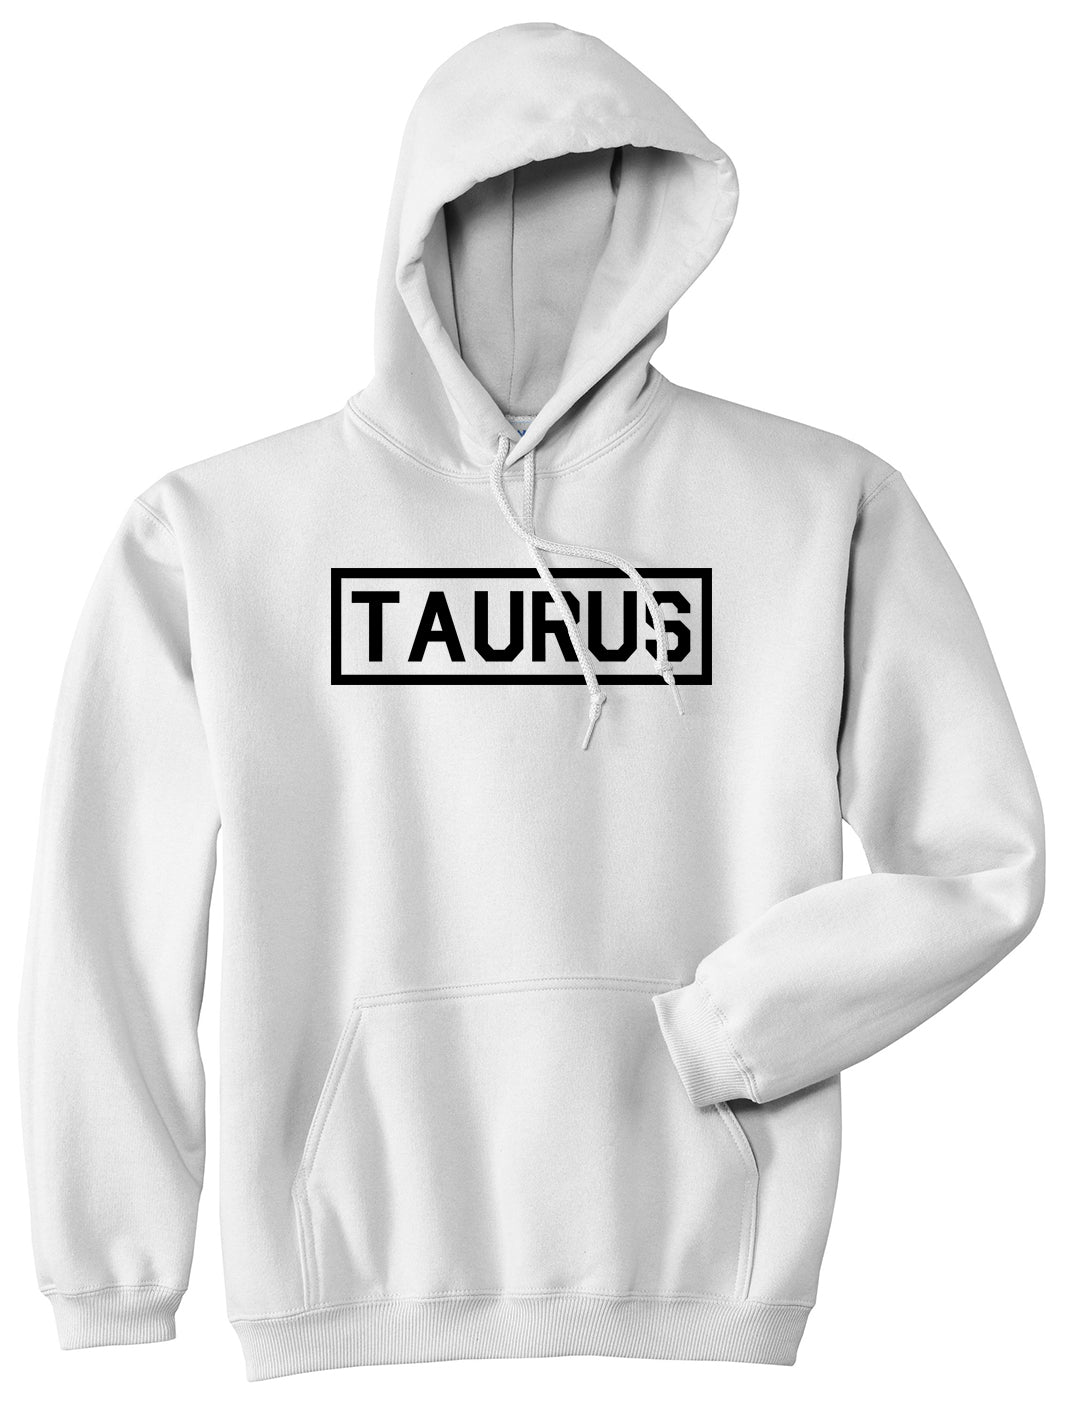 Taurus Horoscope Sign Mens White Pullover Hoodie by KINGS OF NY